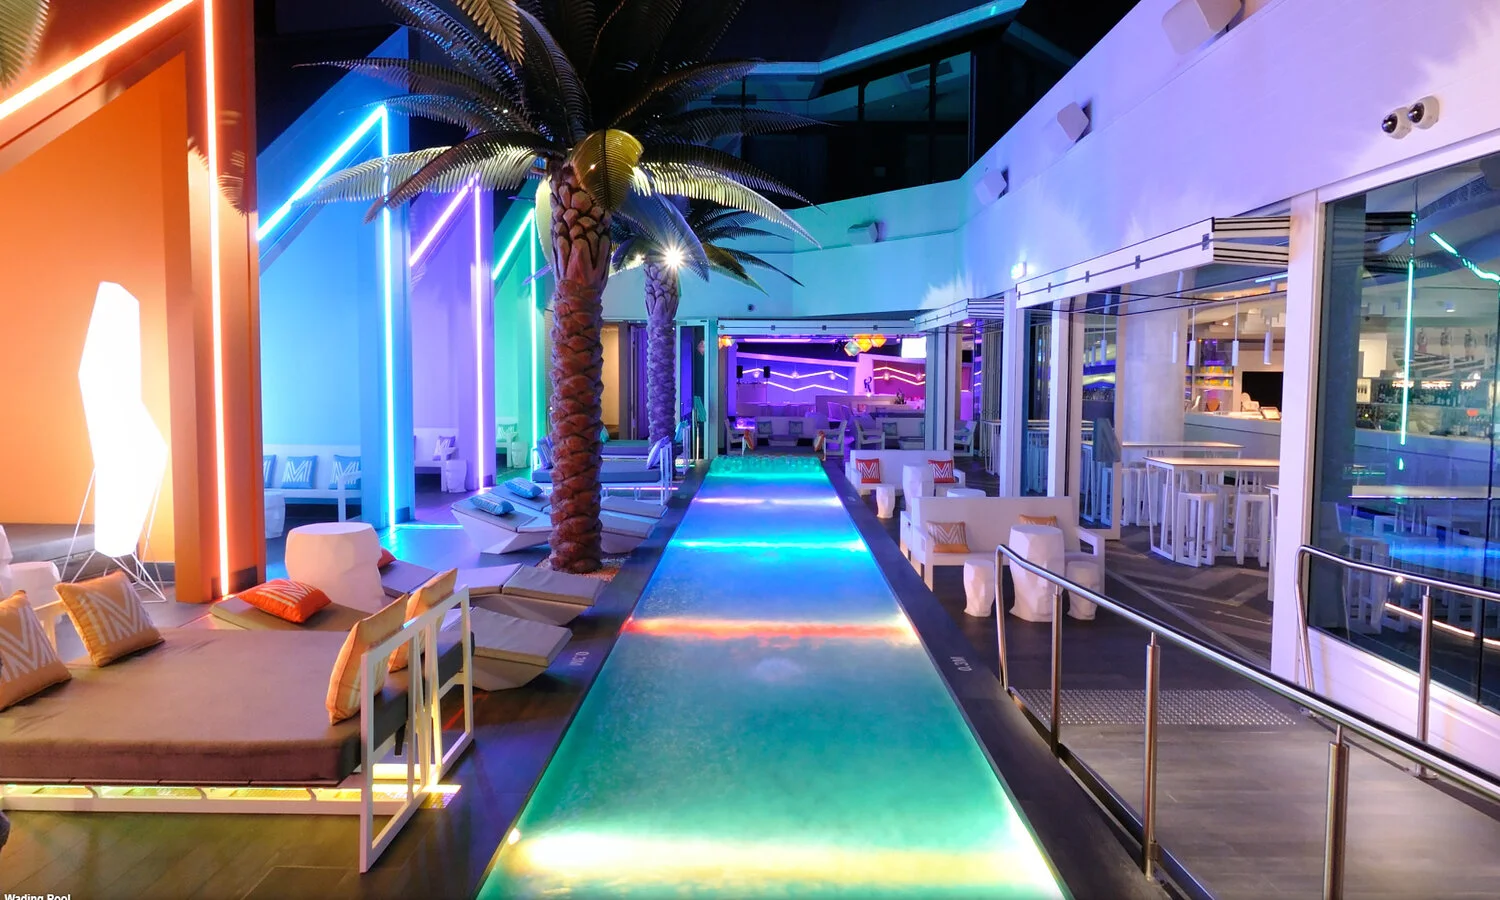 Matisse Beach Club at night with their multi-colored pool deck featuring a beautiful Bar viewable through multiple large glazed folding doors.